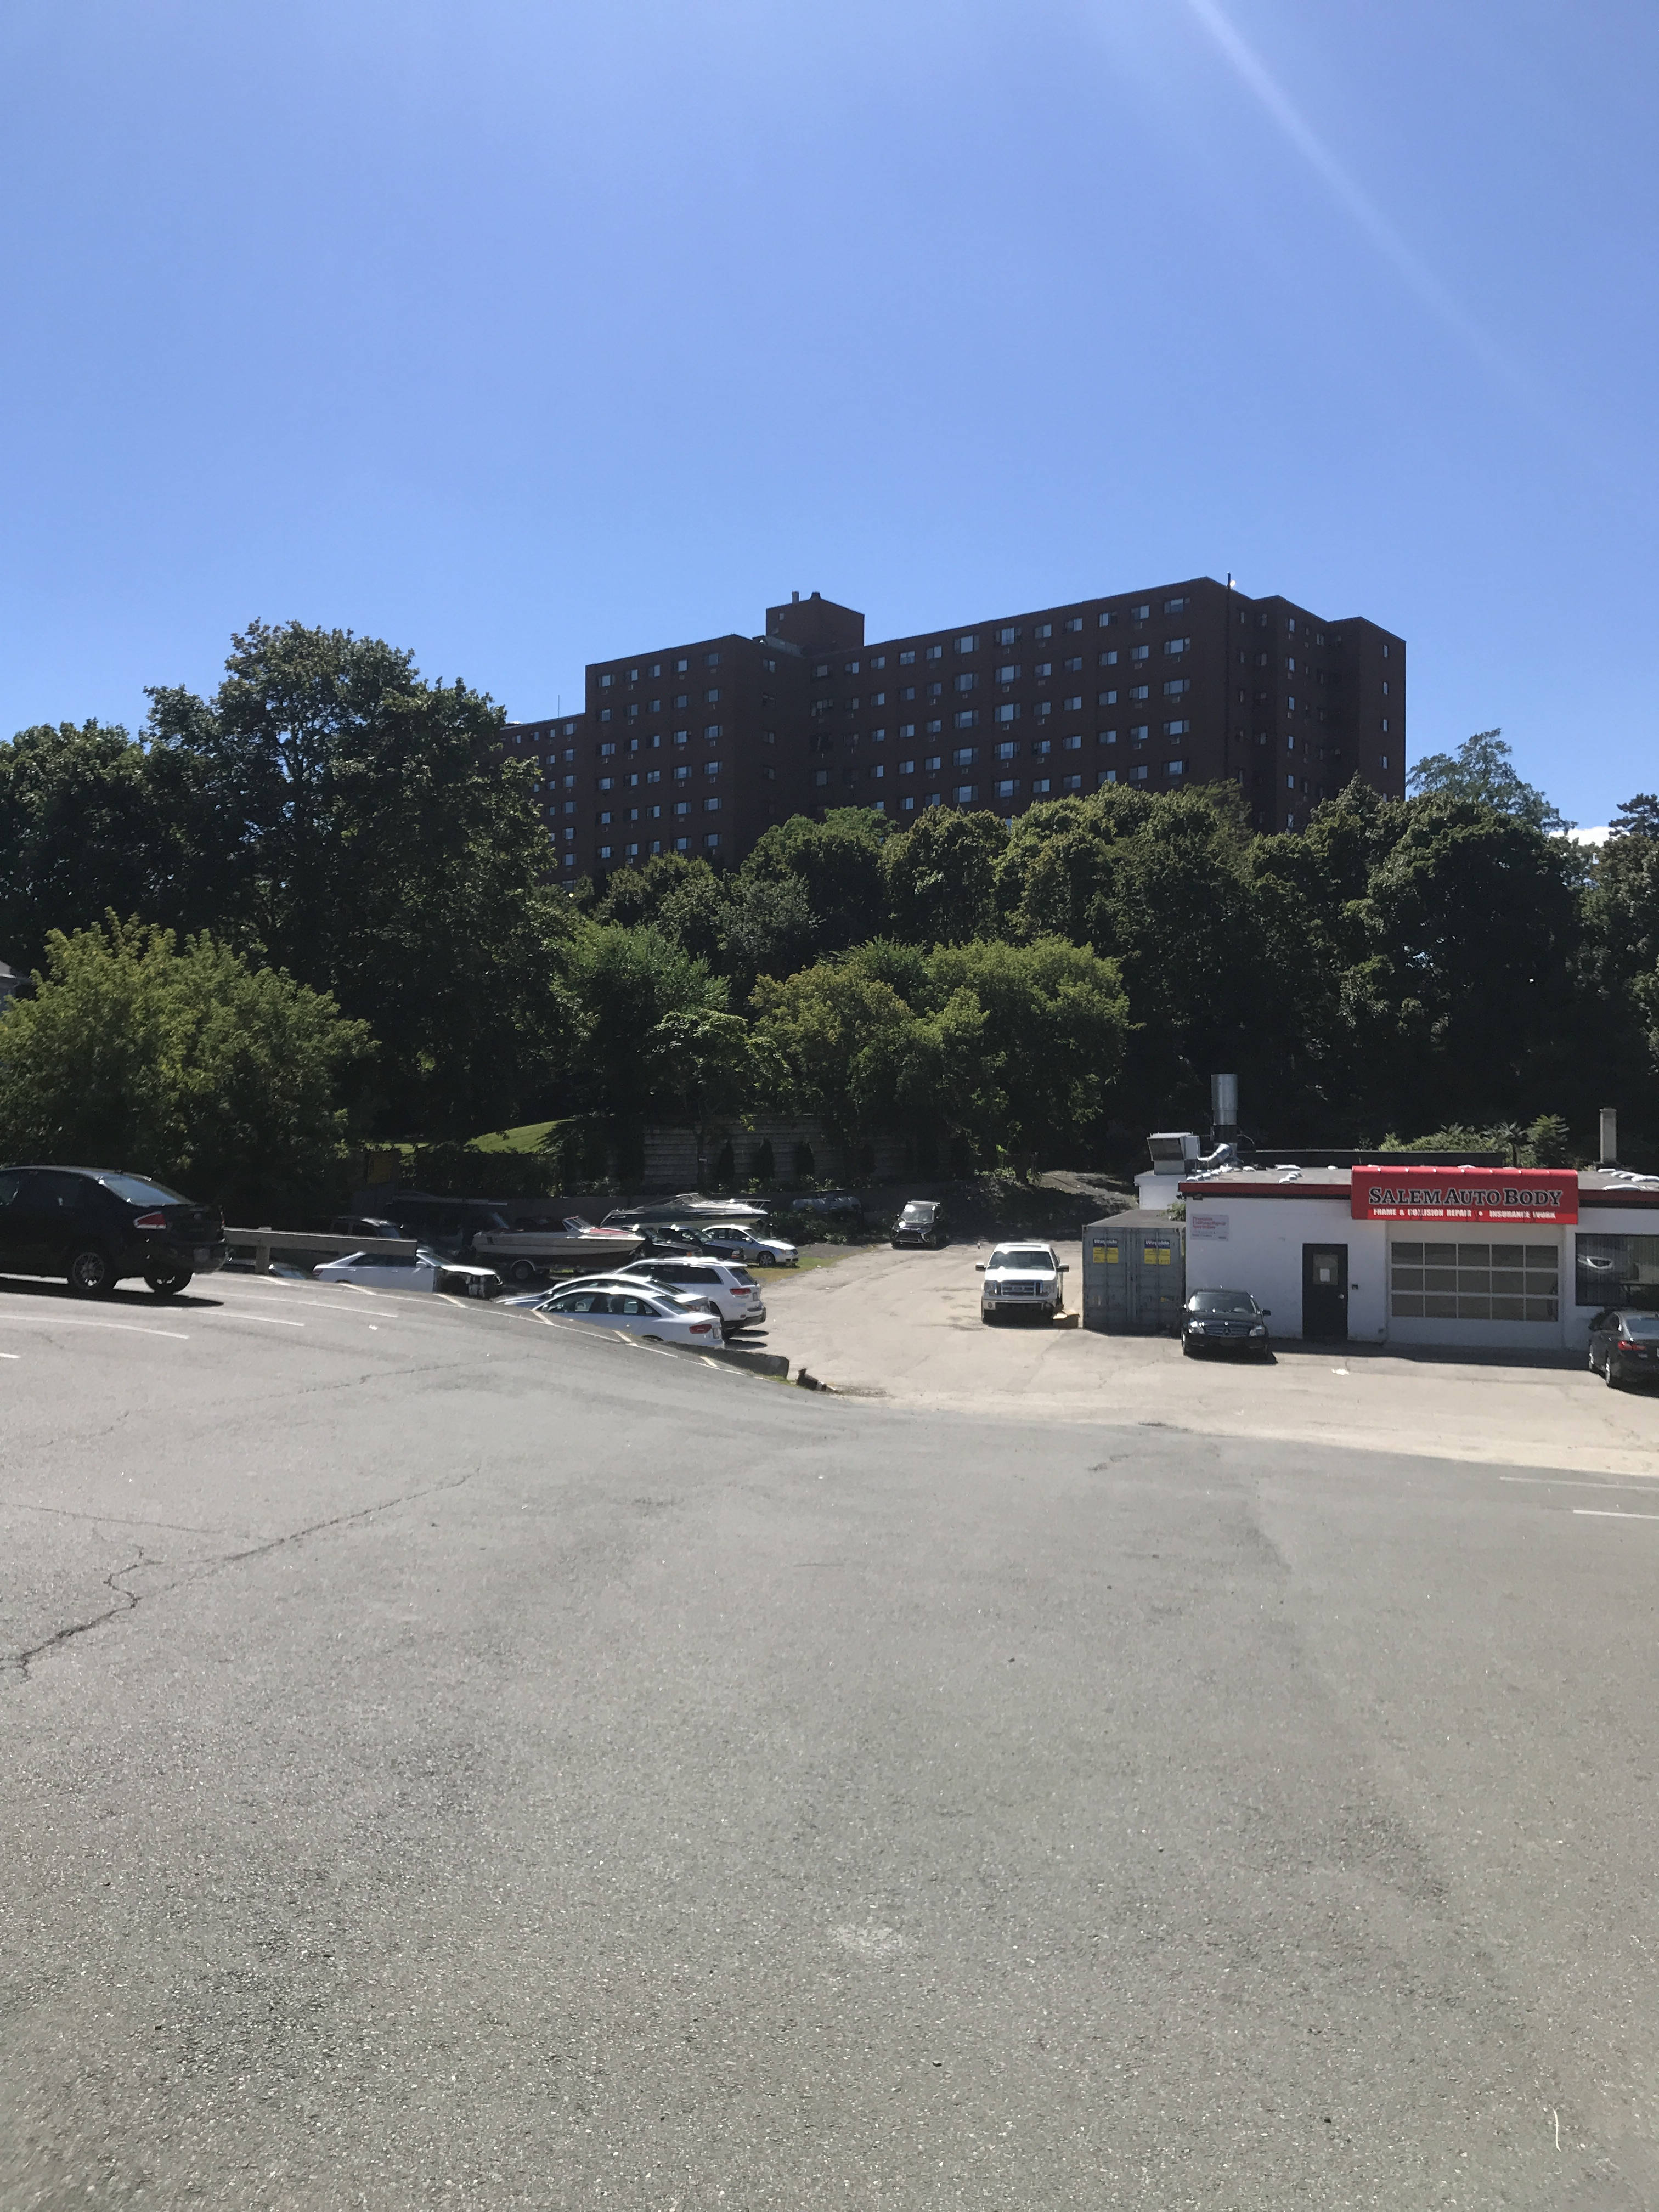 A view across a street. In the middle ground is an auto-body shop surrounded by a sizeable lot with a few cars parked in it. Behind the lot is a wooded area, and behind that, six stories of a long dark brick building rise over the trees.